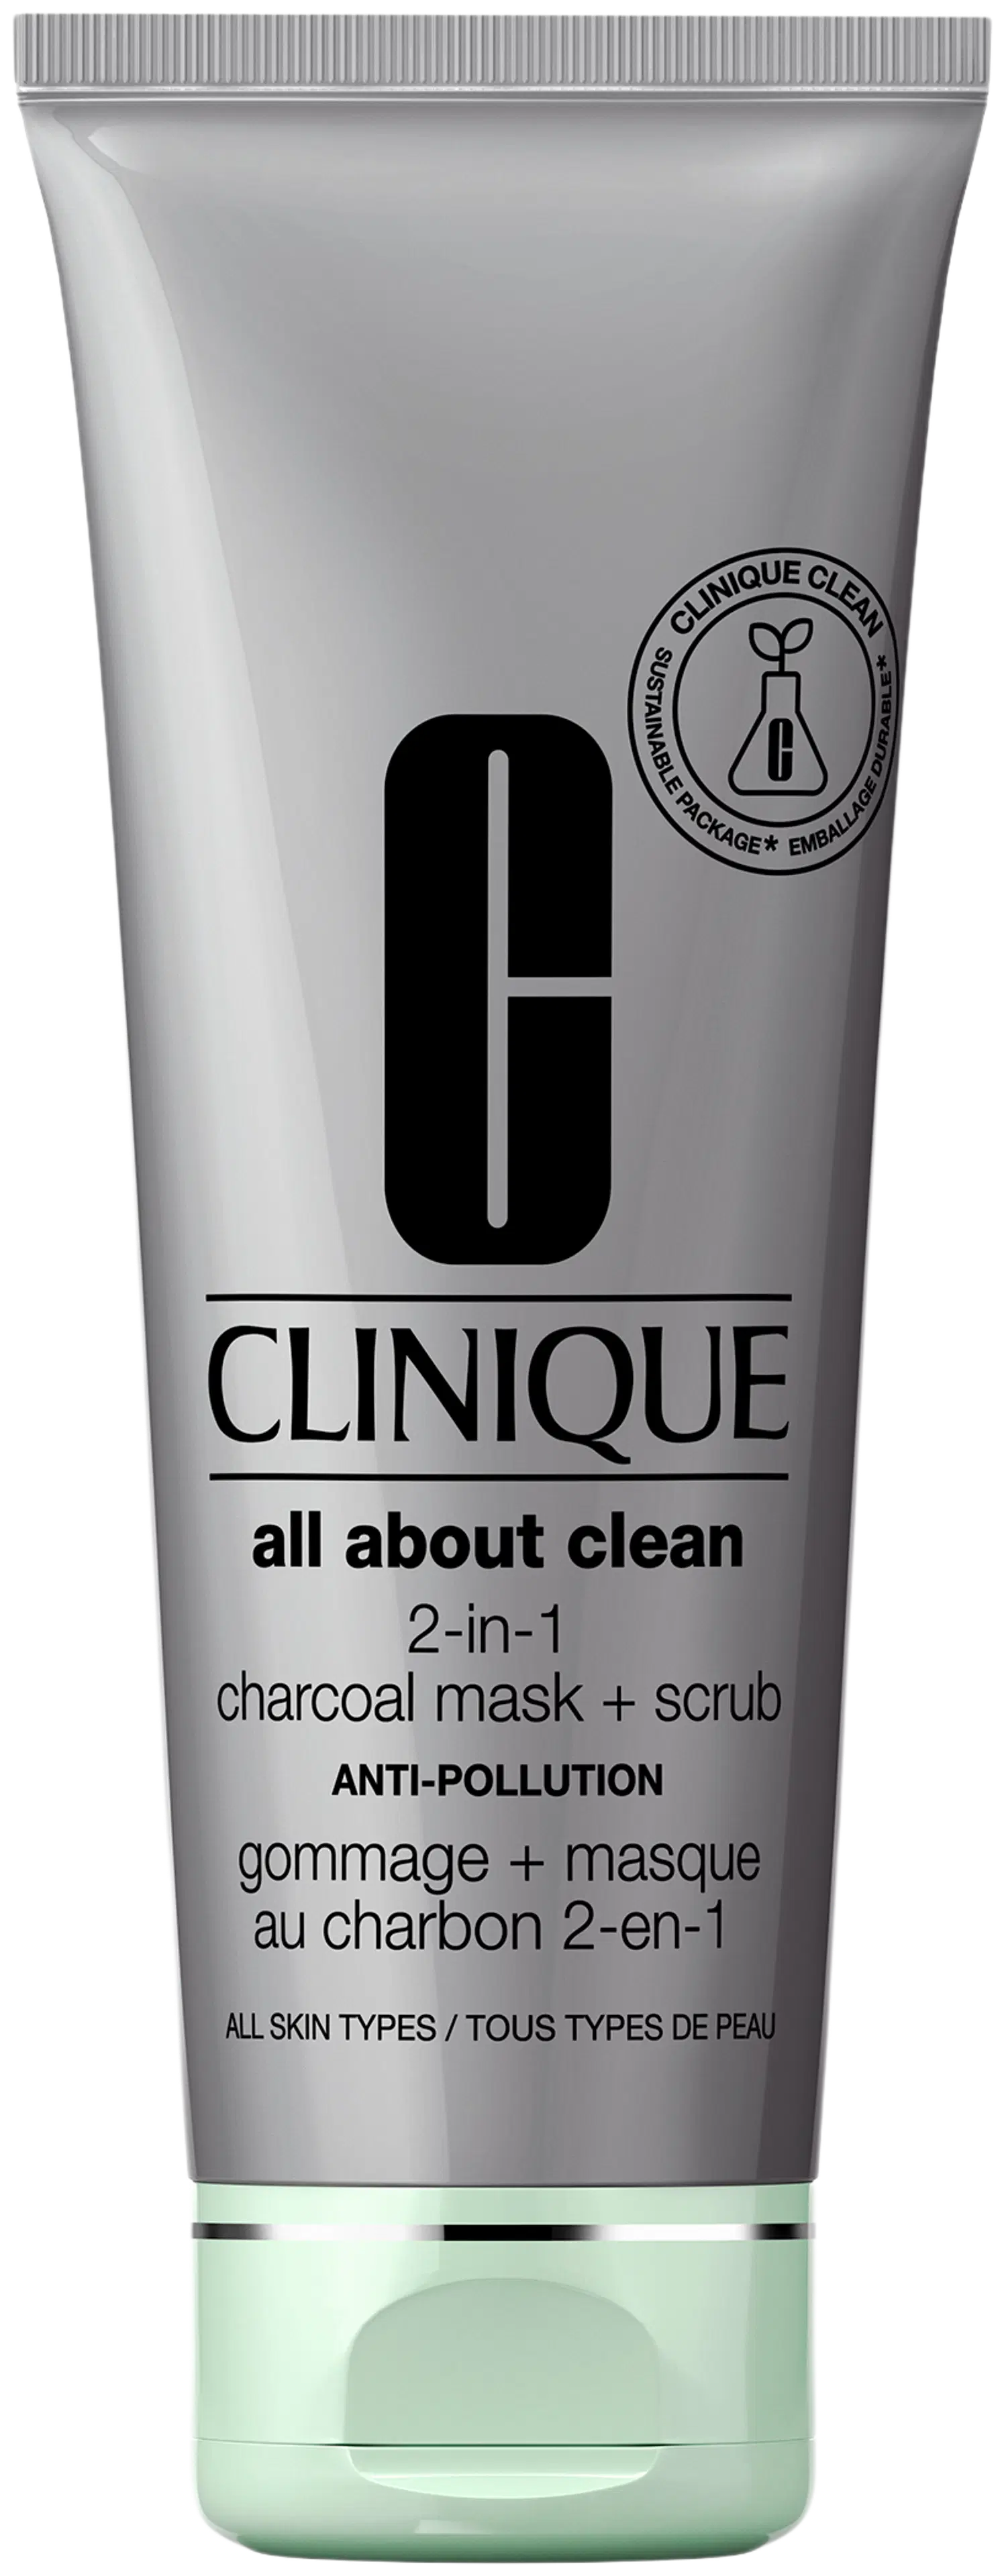 Clinique All About Clean 2-in-1 Charcoal Mask + Scrub kasvonaamio 100 ml